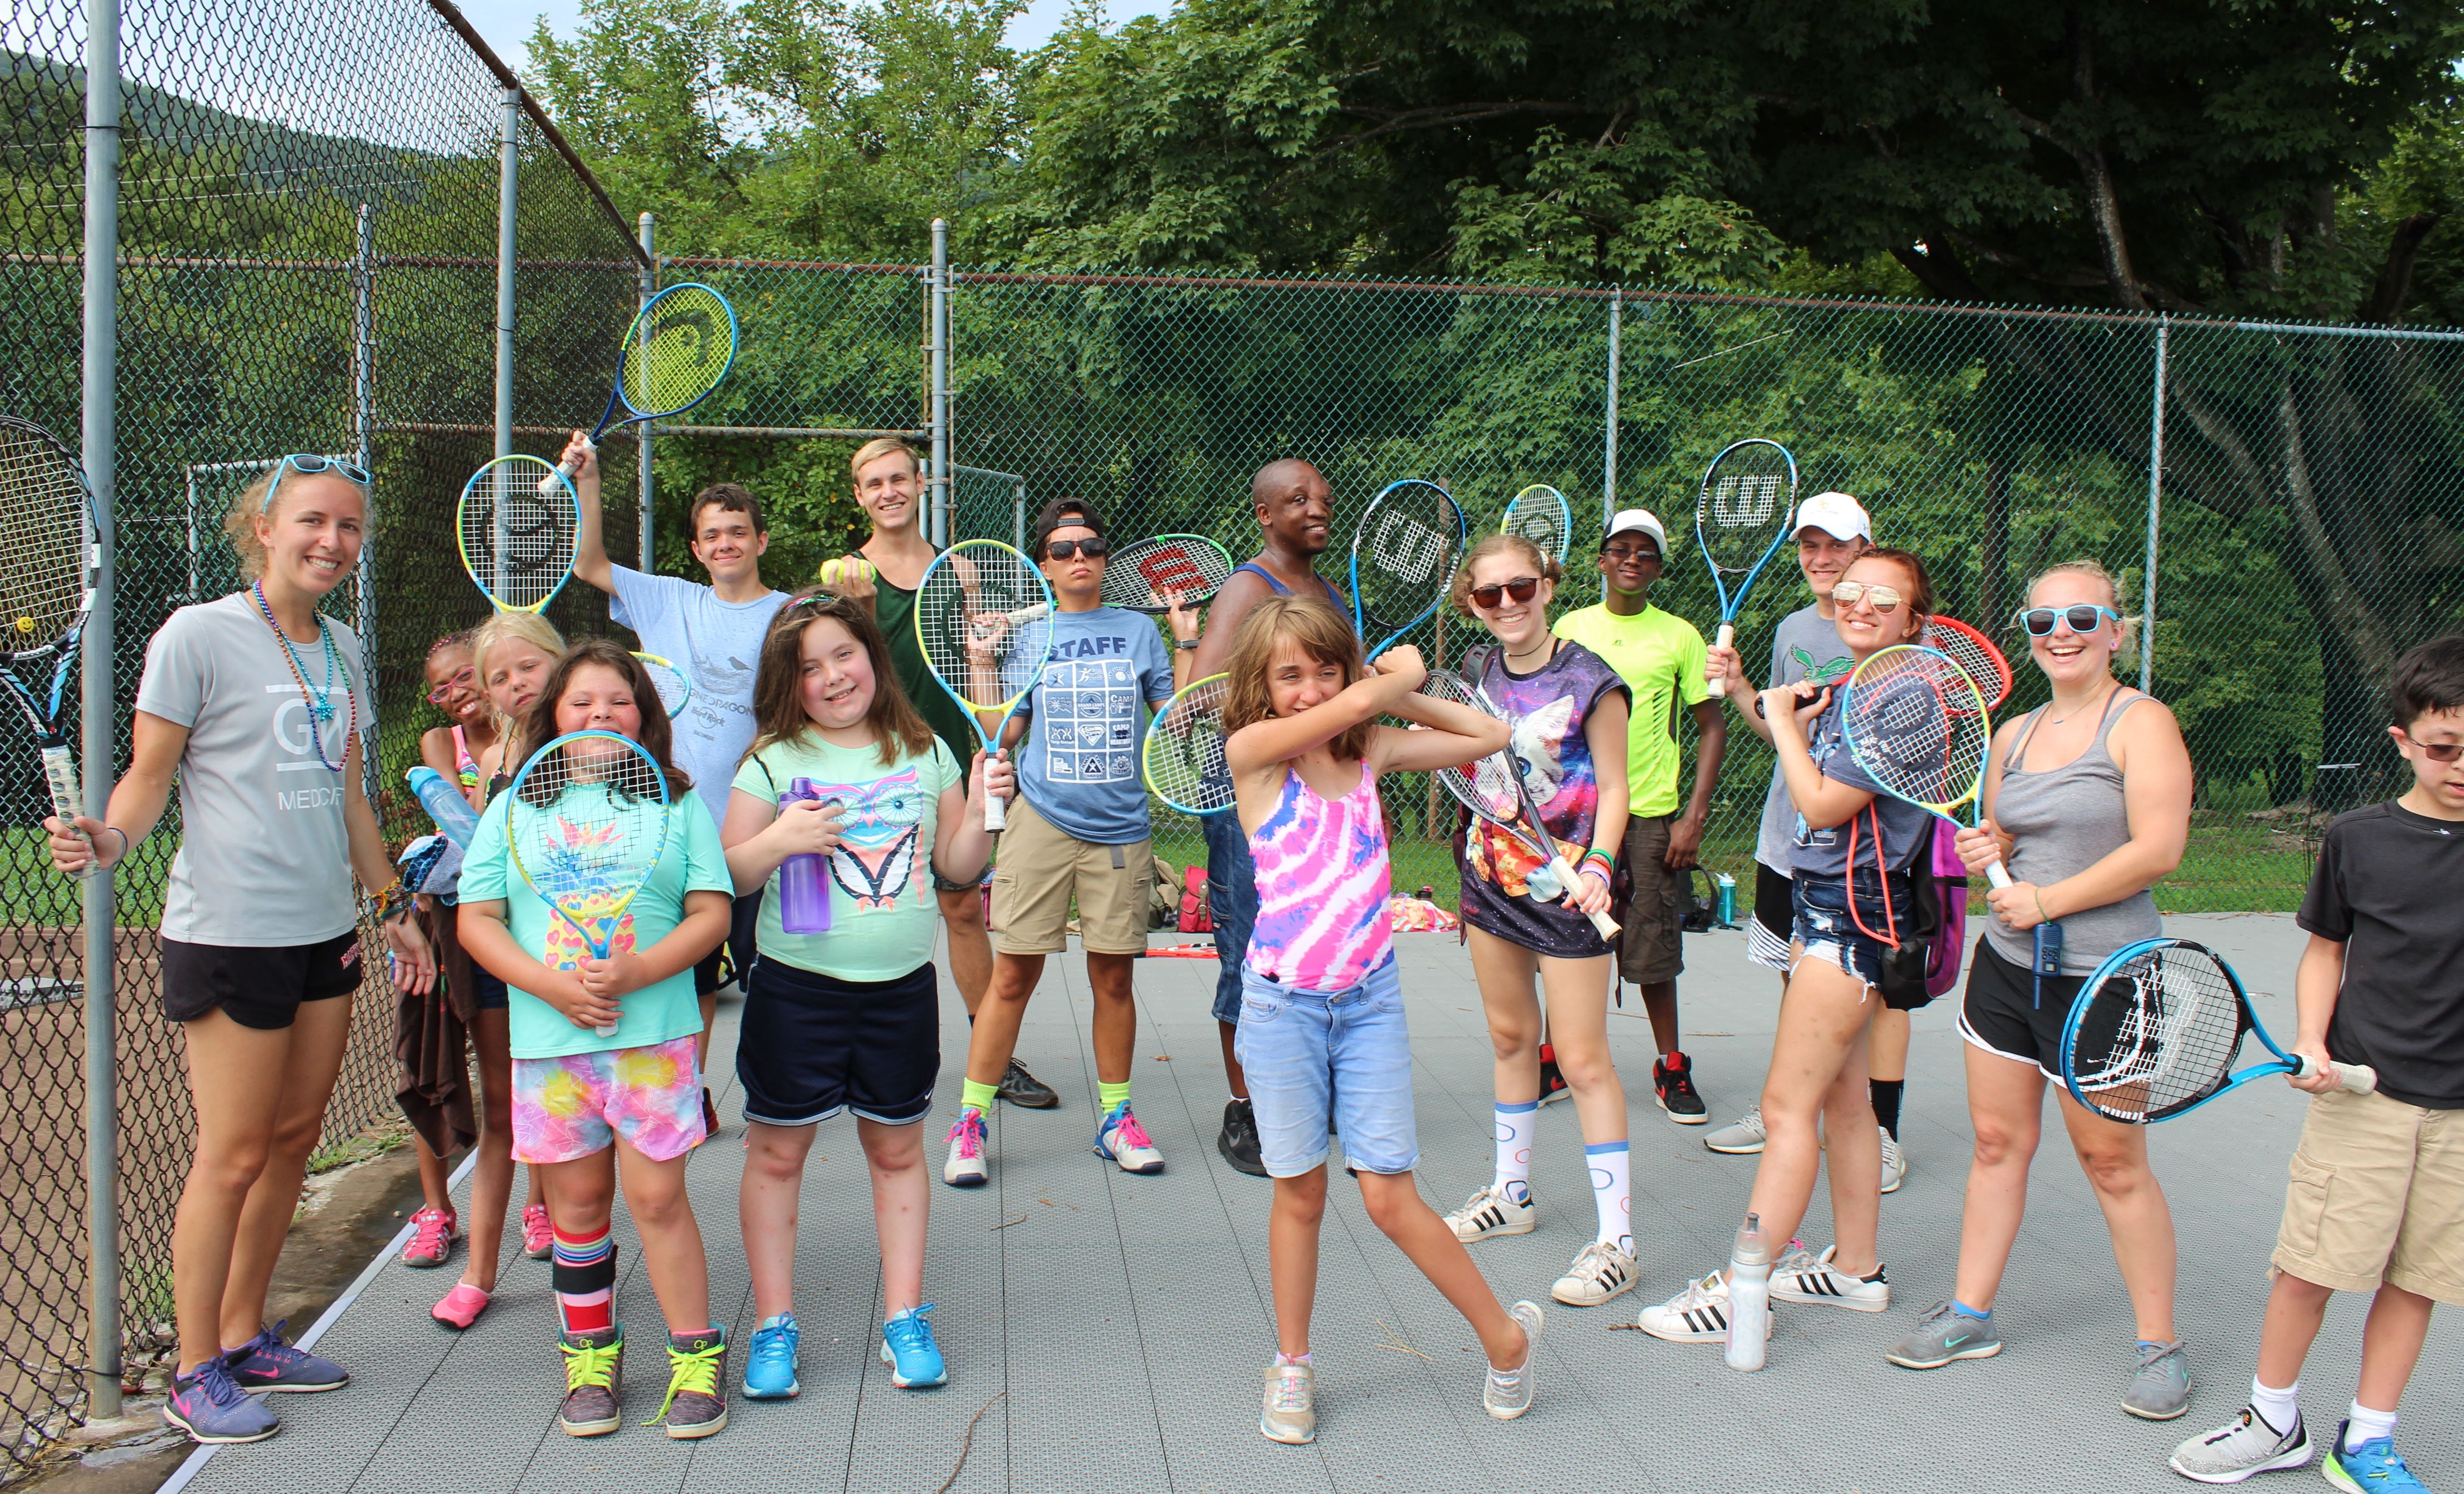 Campers hold tennis rackets and pose for a photo.